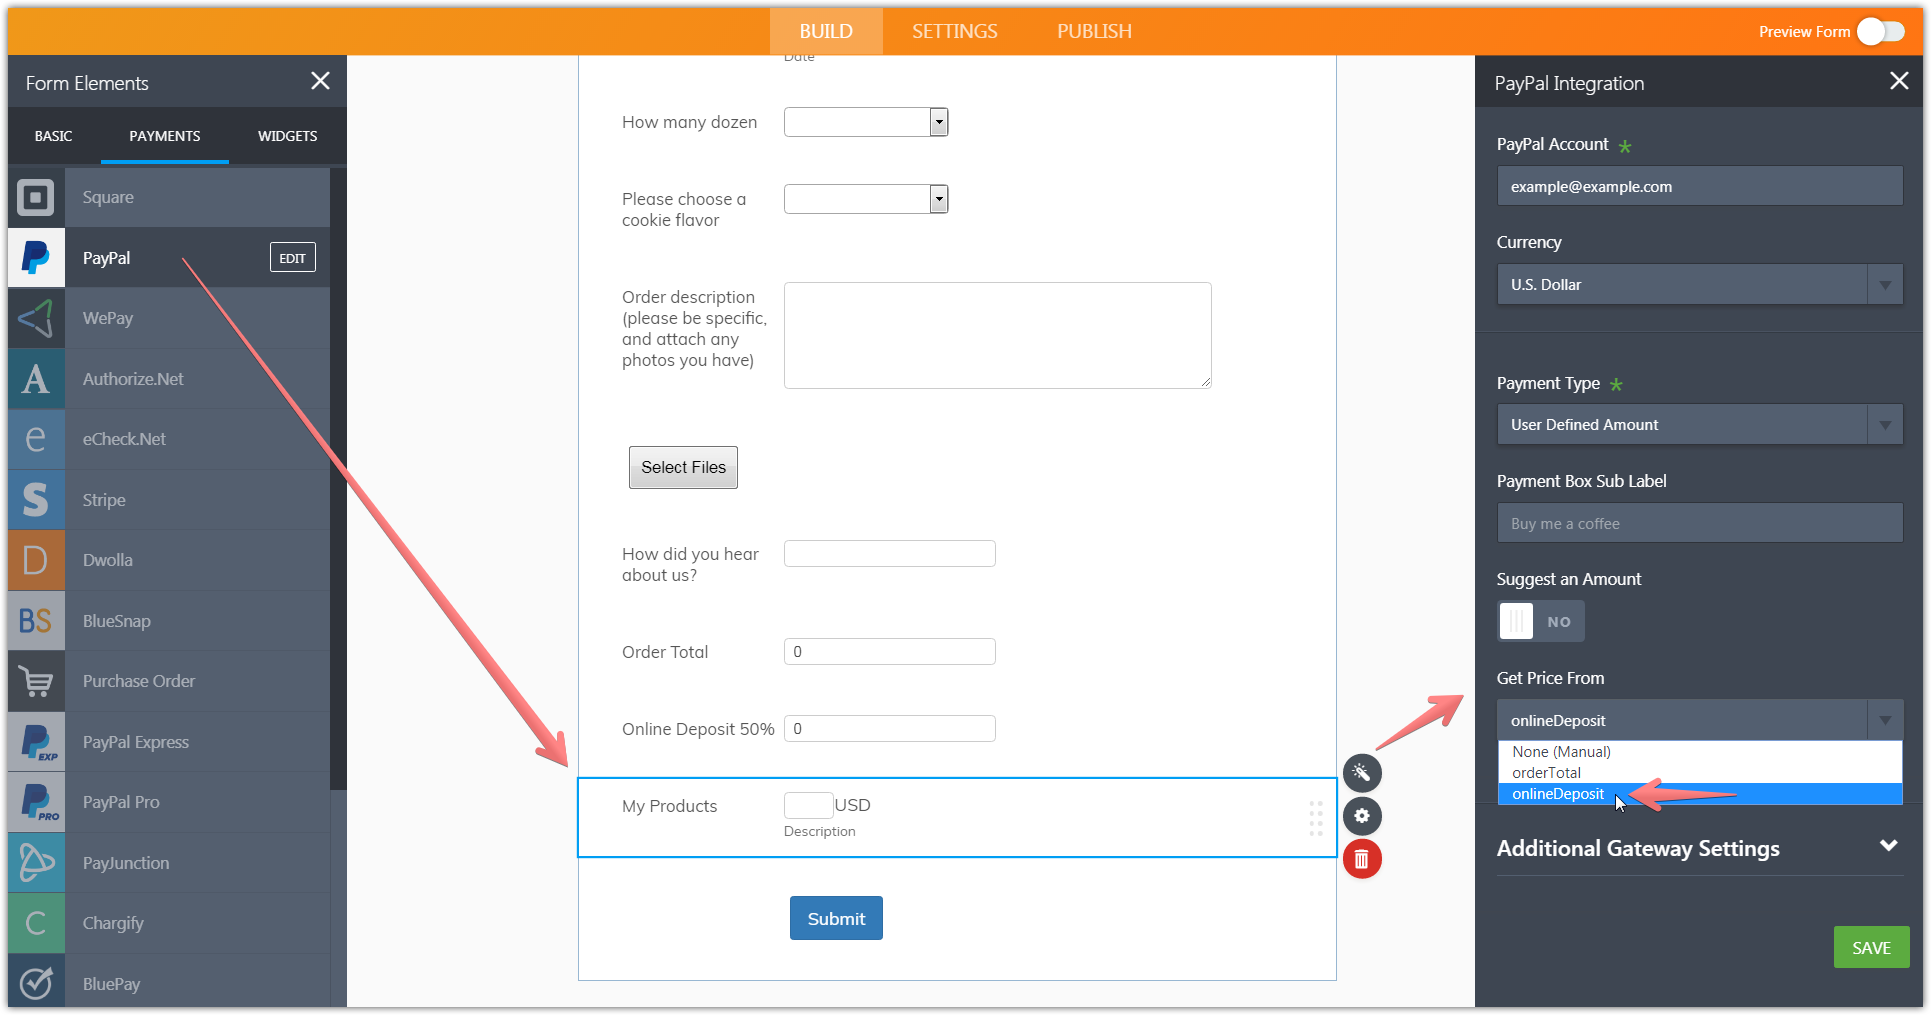 Creating order form with 50% online payment deposit Image 3 Screenshot 62